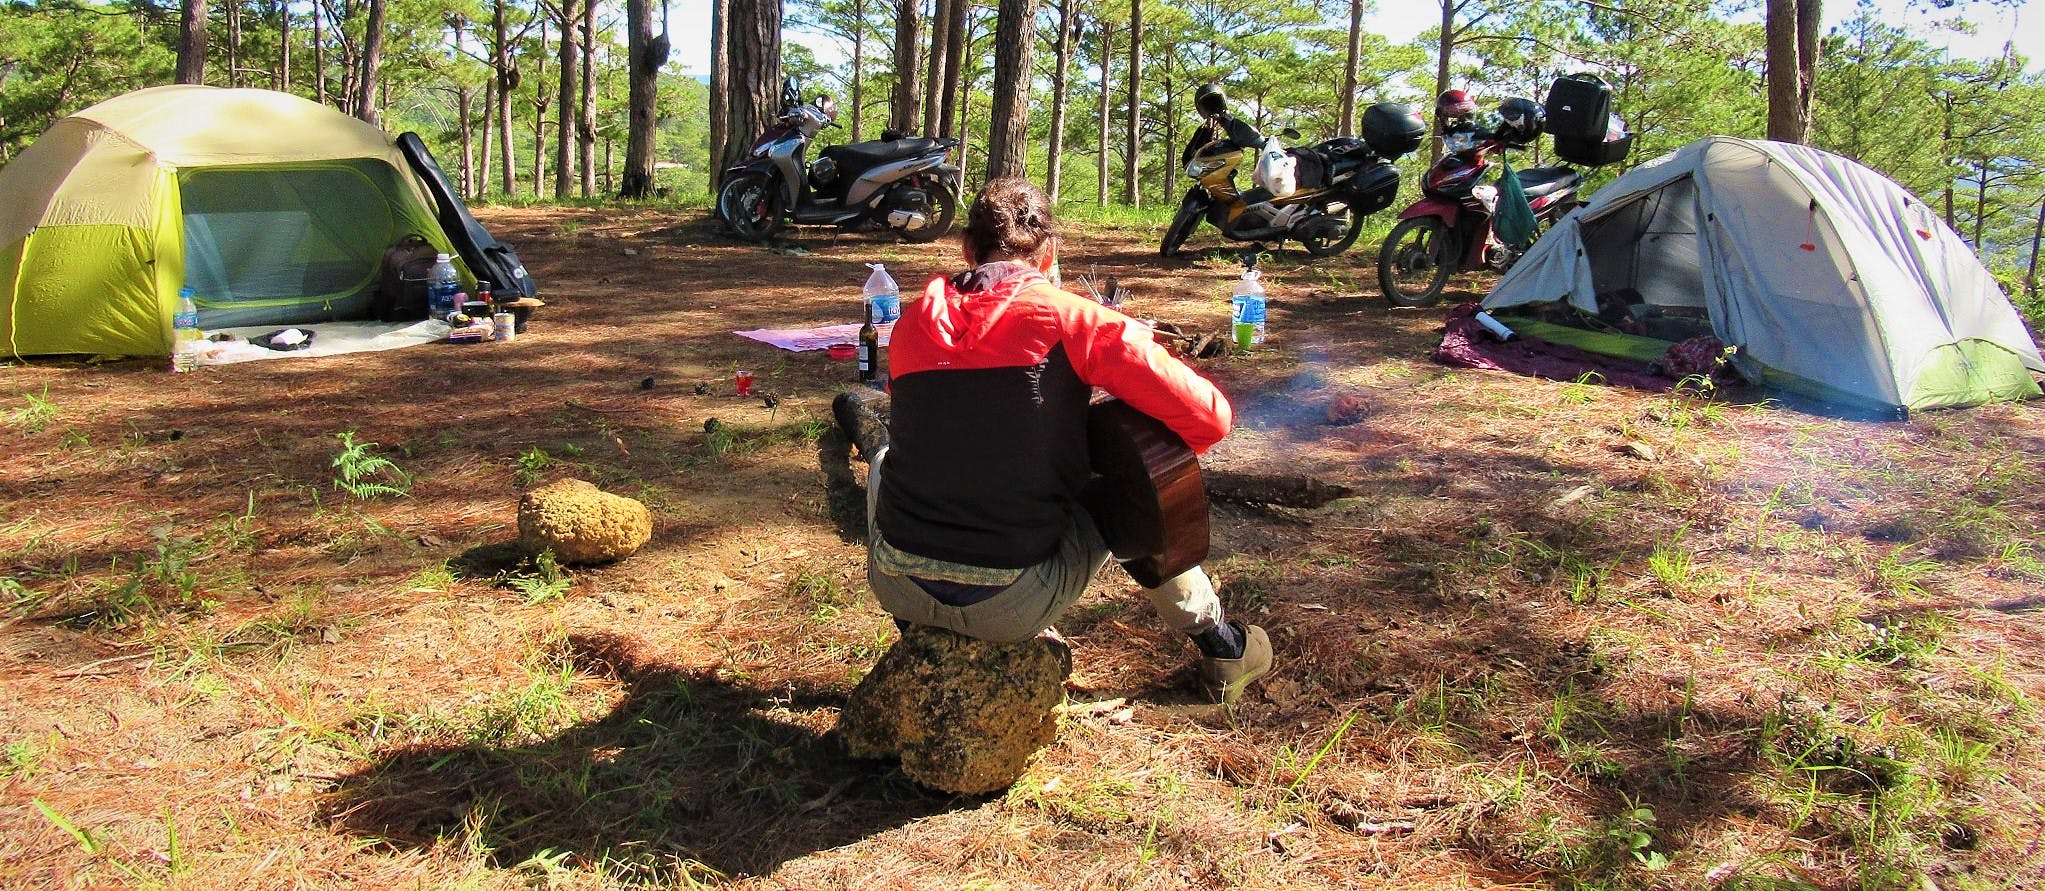 New Year's Camping in the Pine Forests, Dalat, Vietnam